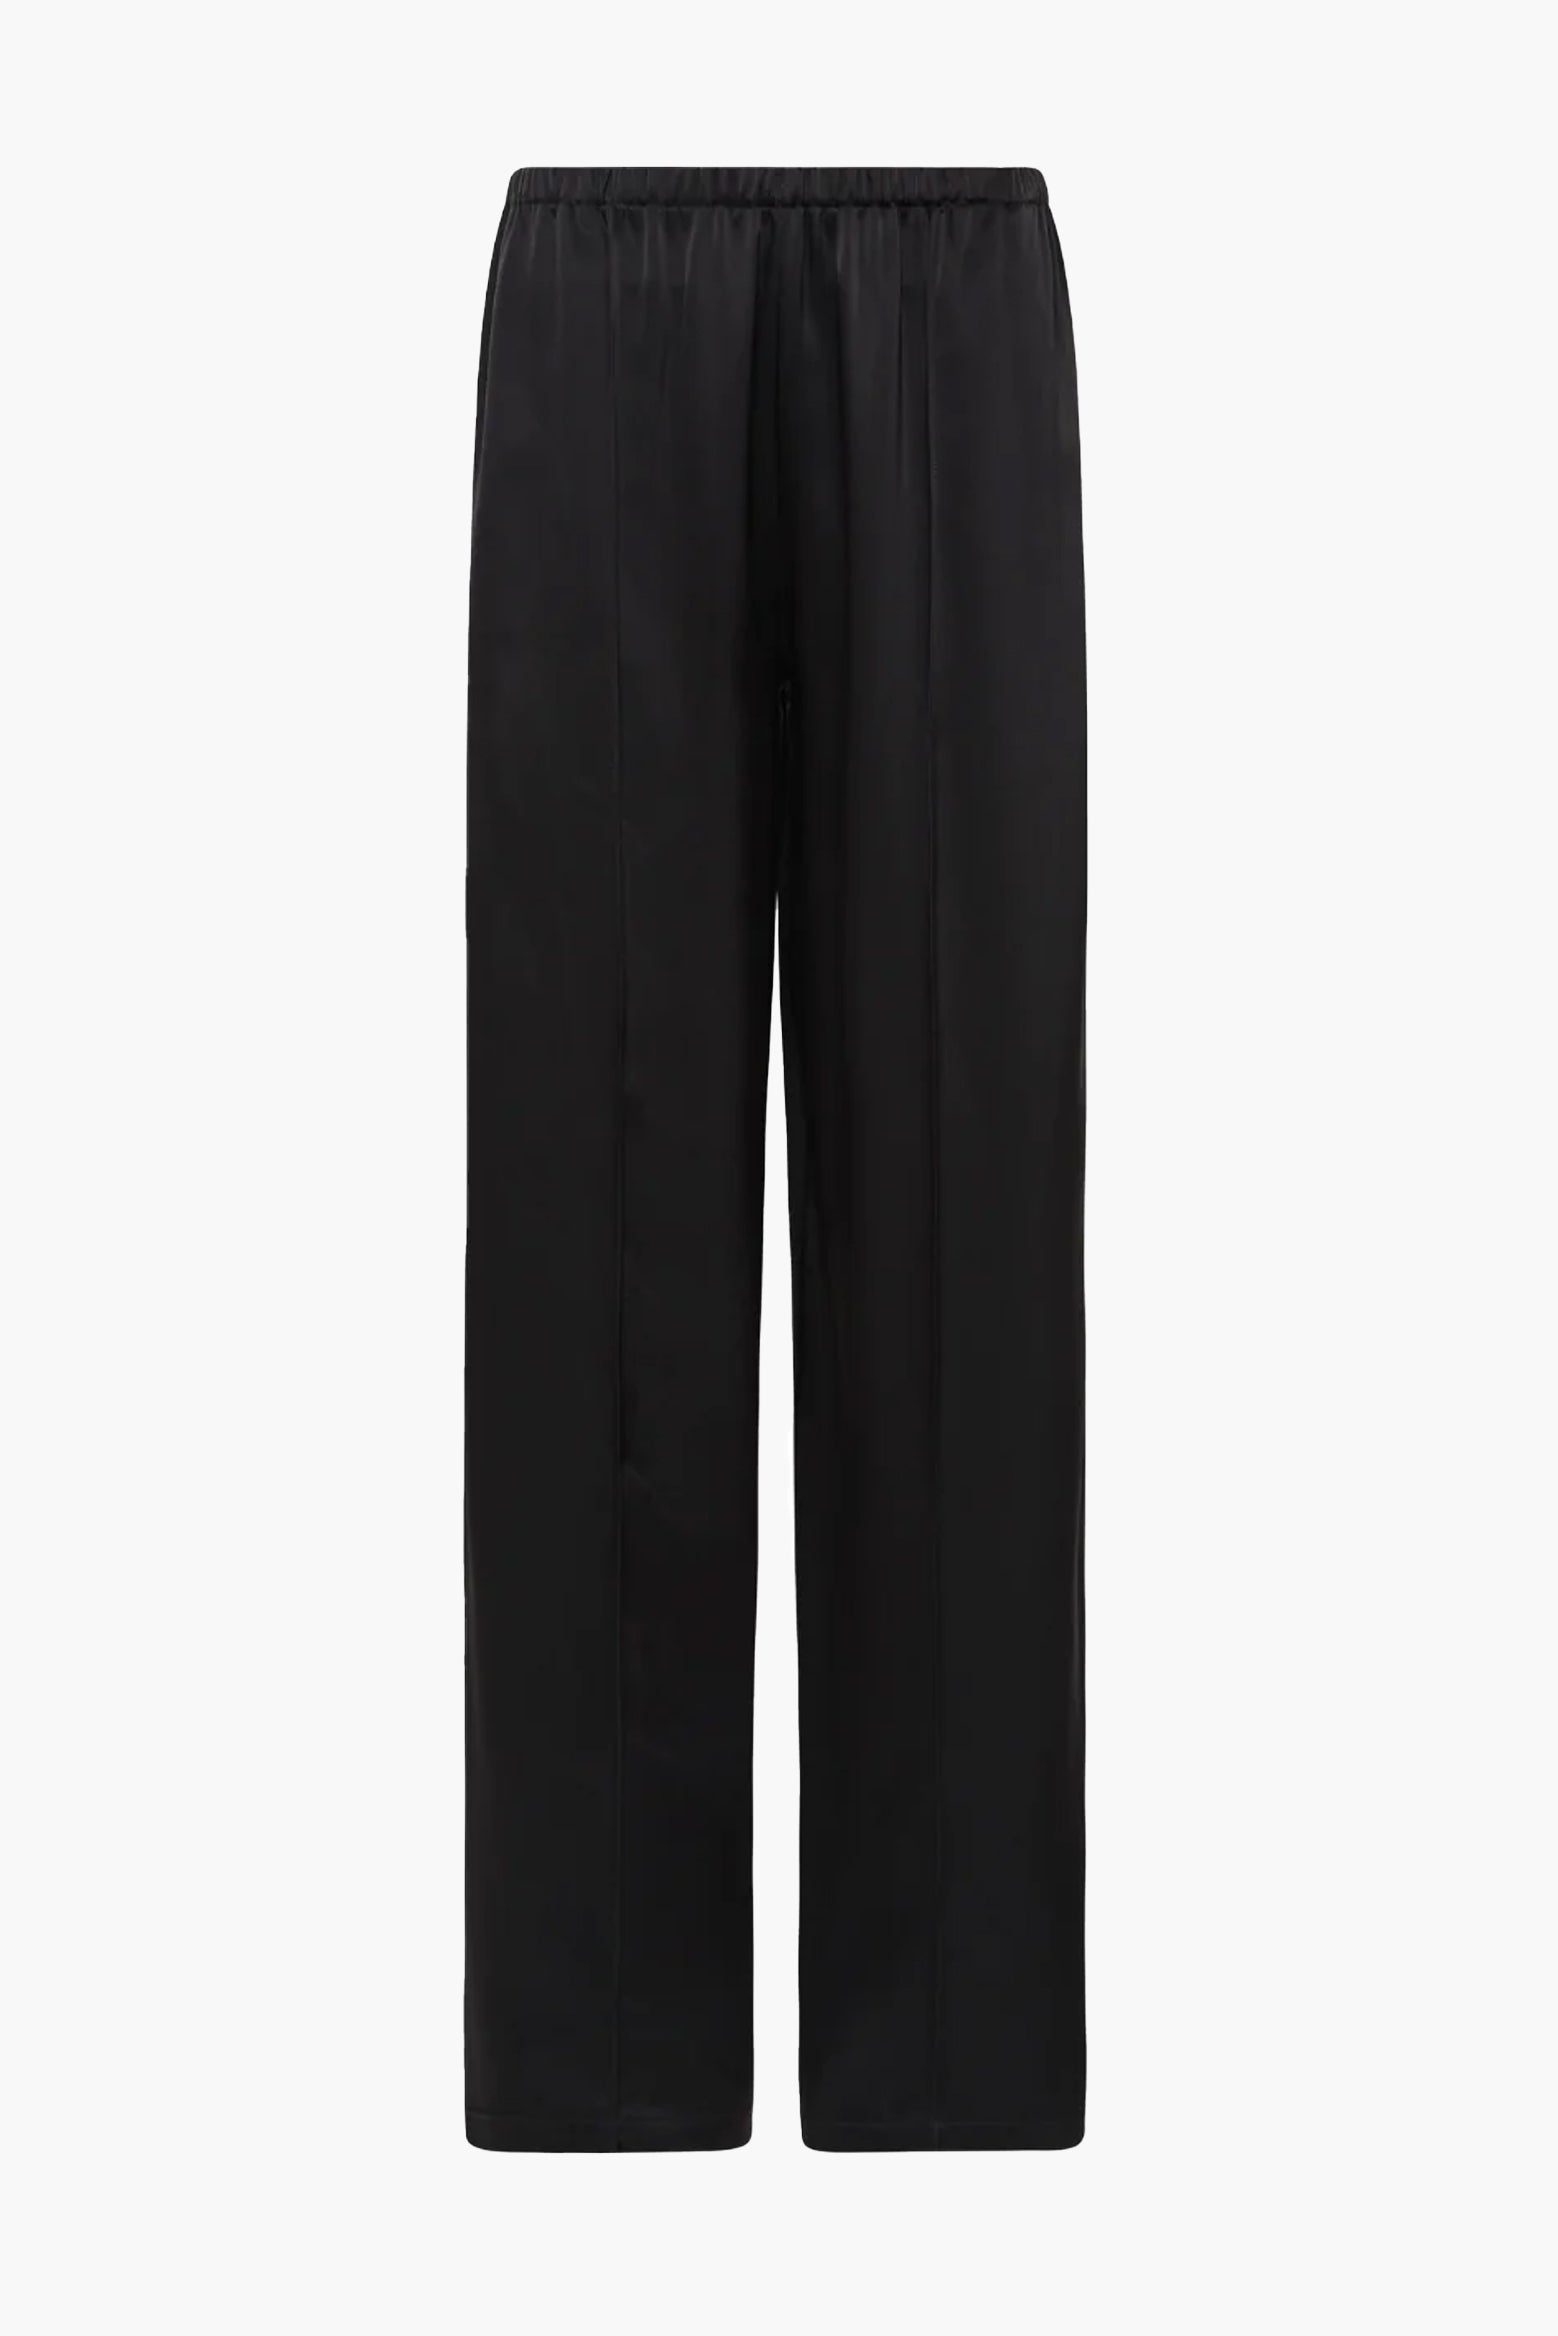 ESSE STUDIOS Classico Tuck Pant in Black available at The New Trend Australia